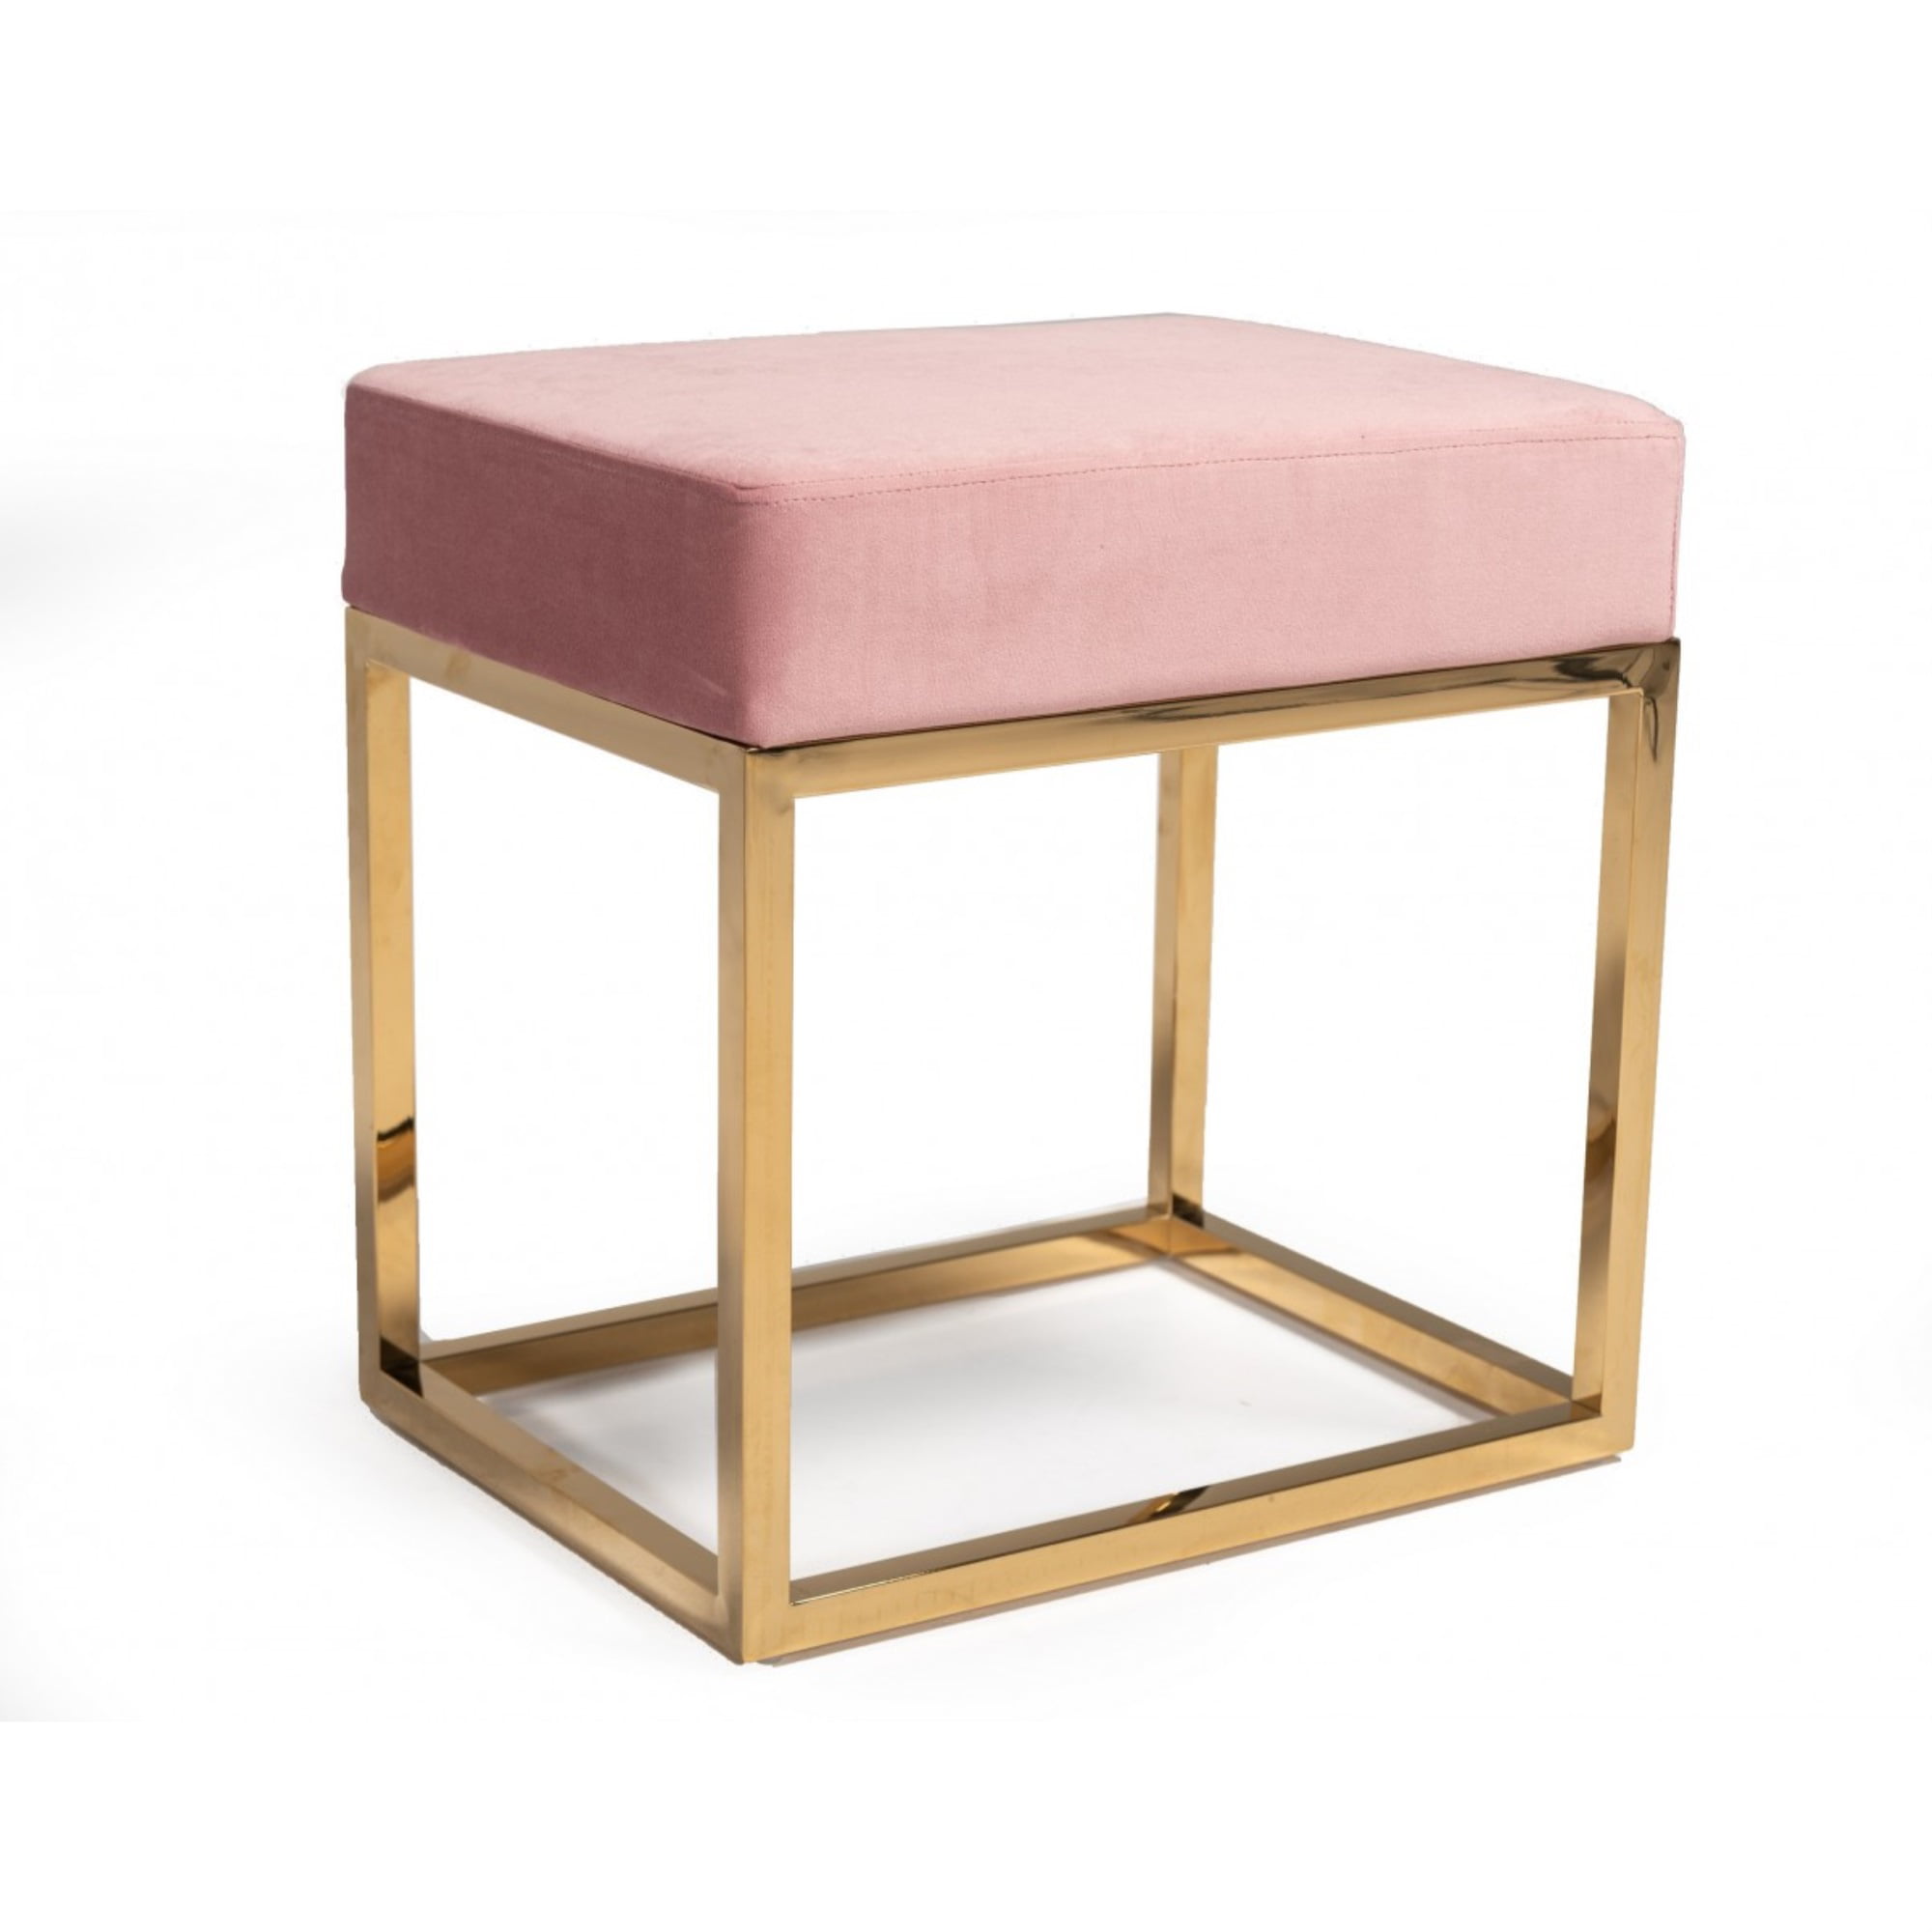 Square Modern Pink Velvet Ottoman with Gold Stainless Steel